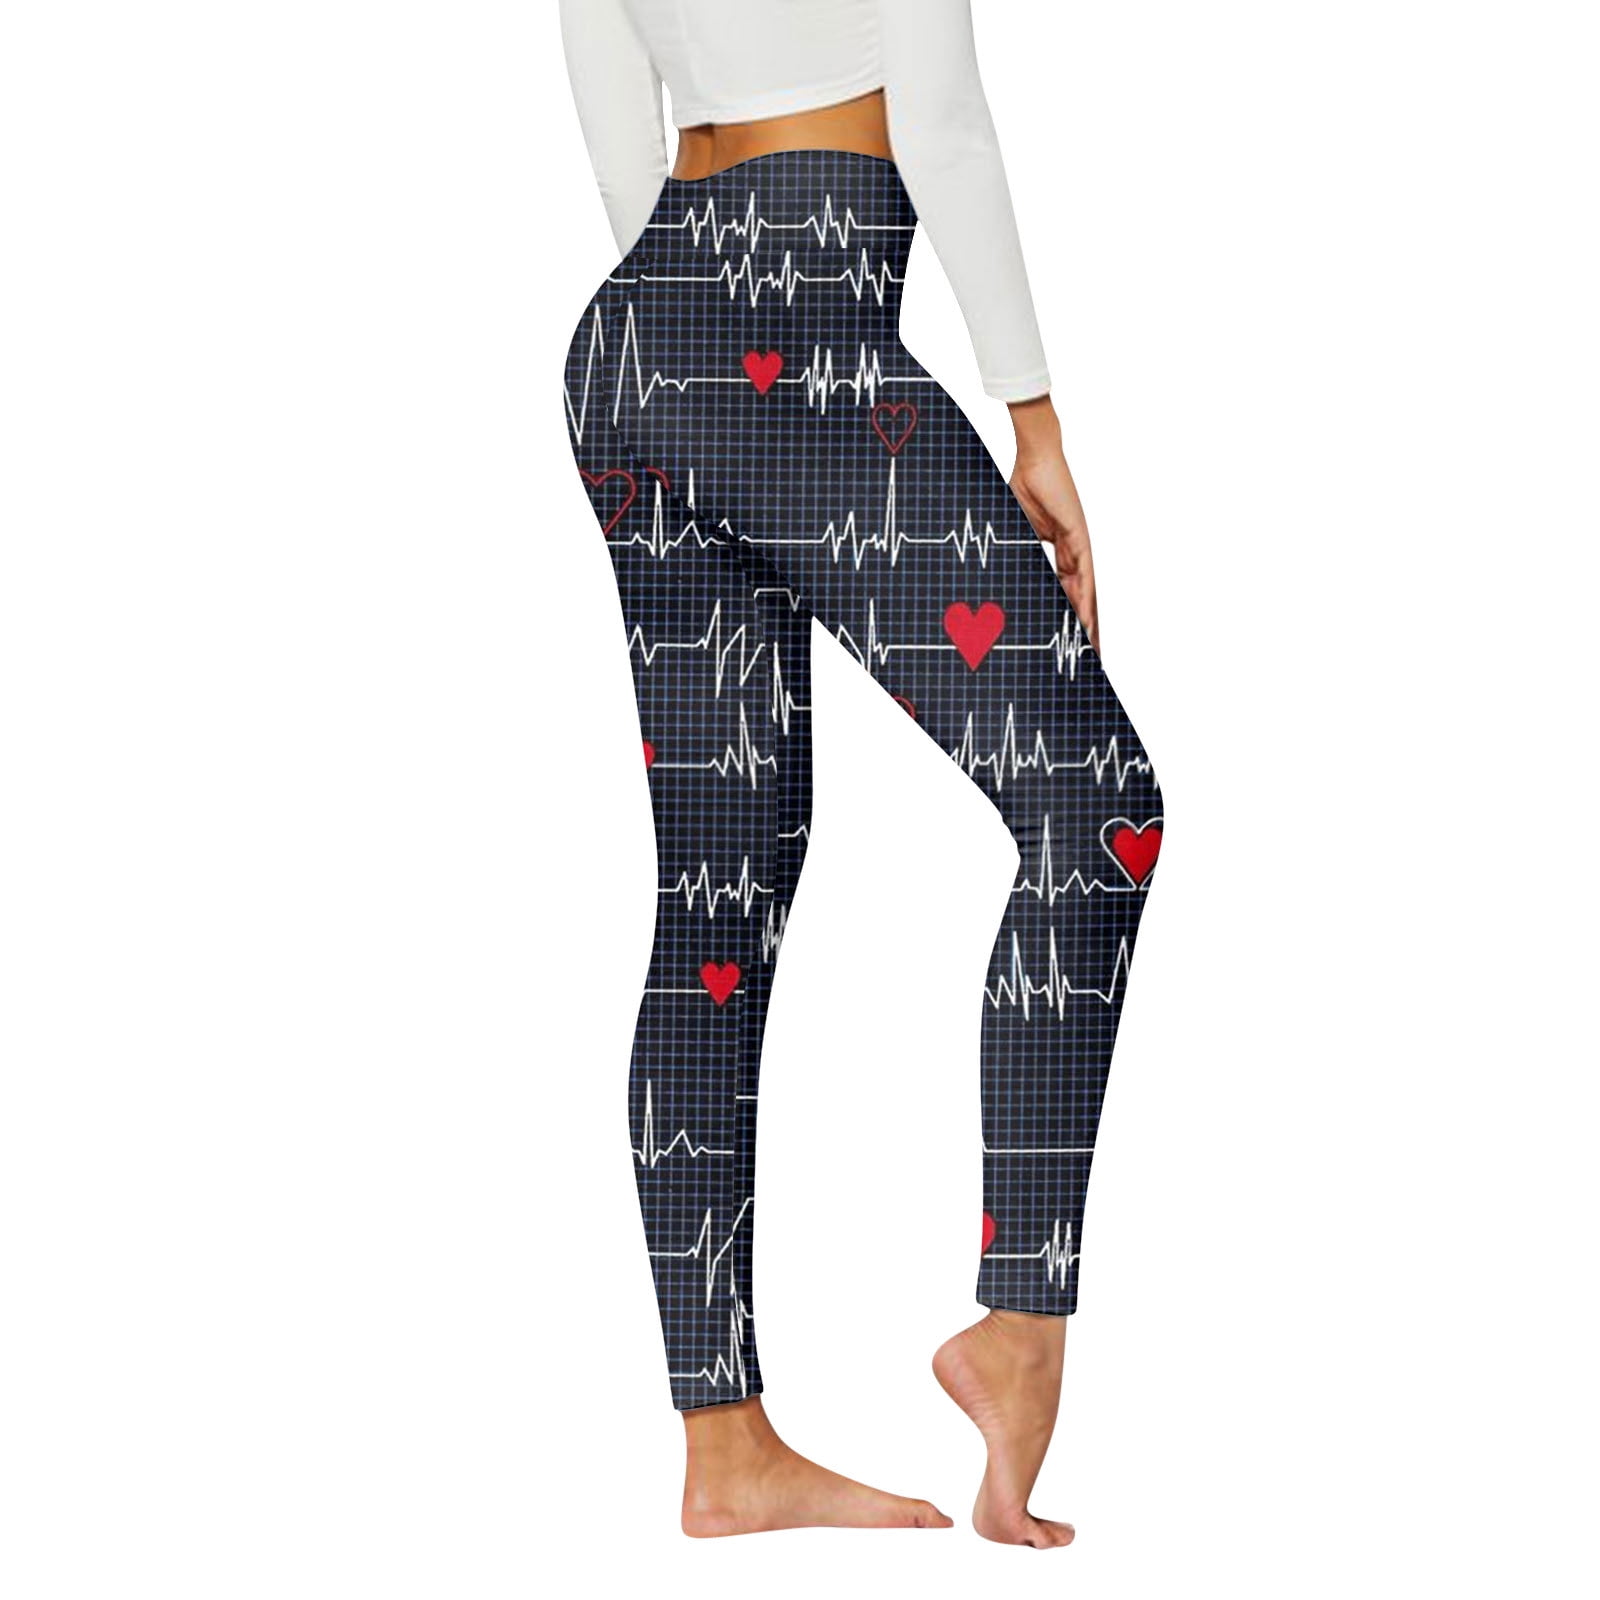 TWIFER Valentines Day Gift Sets Women's Legging Womens Casual